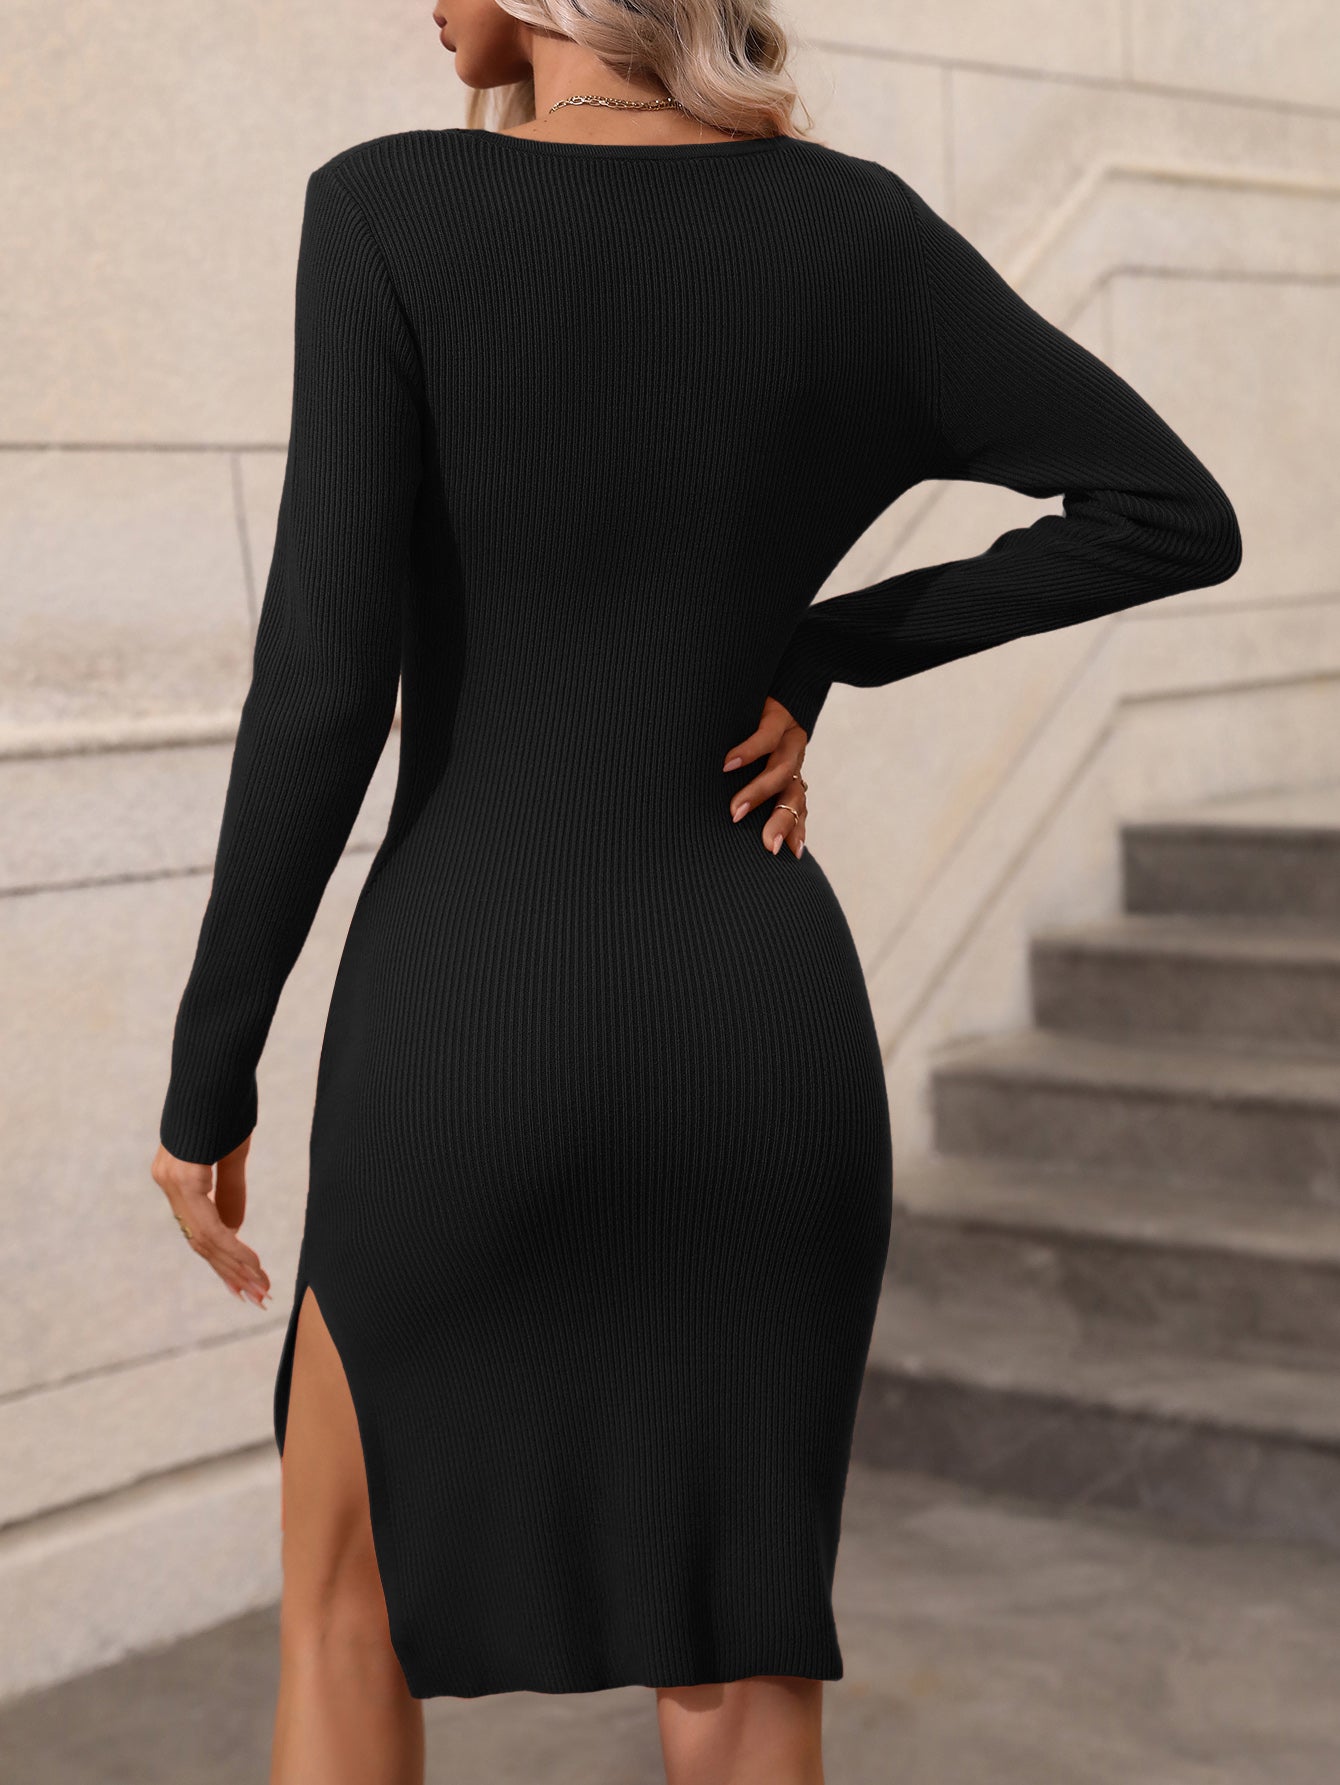 Contrast Slit Sweater Dress - PRIVATE LABEL STYLES